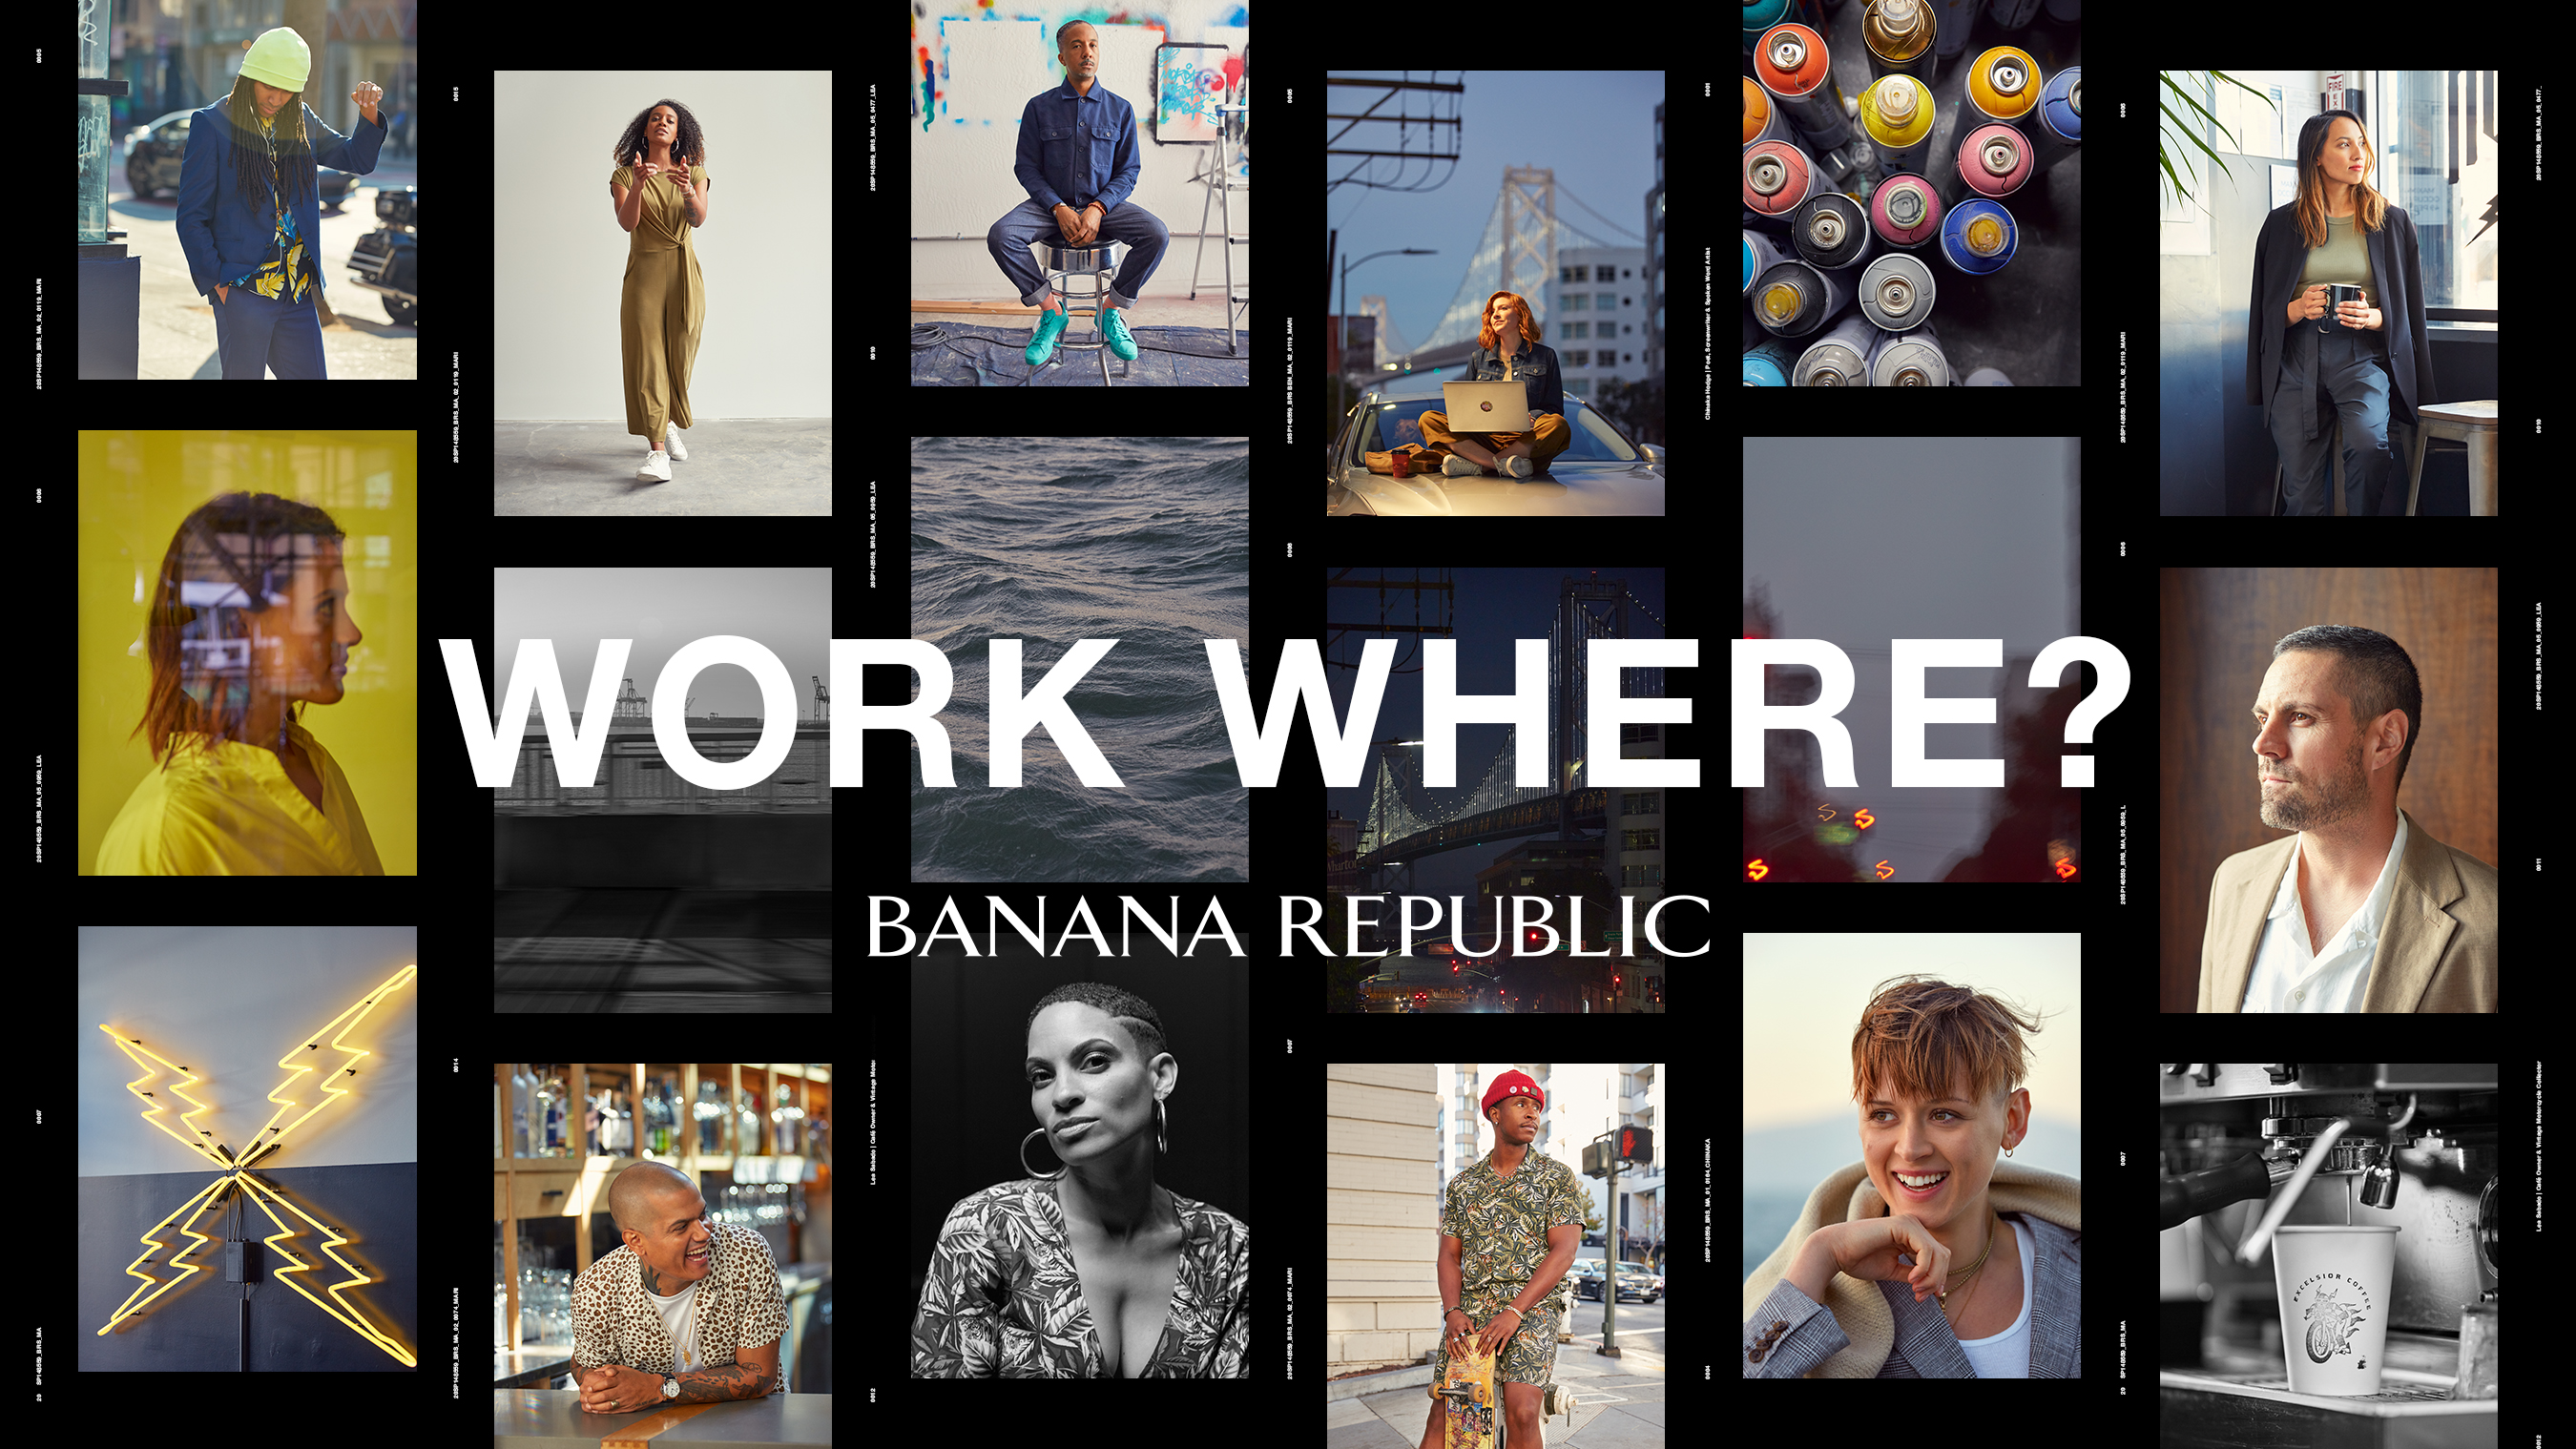 This March, Banana Republic celebrates WORK WHERE? – a campaign of unconventional work – challenging the traditional concept of where, how and why we work, and what we wear to do it.